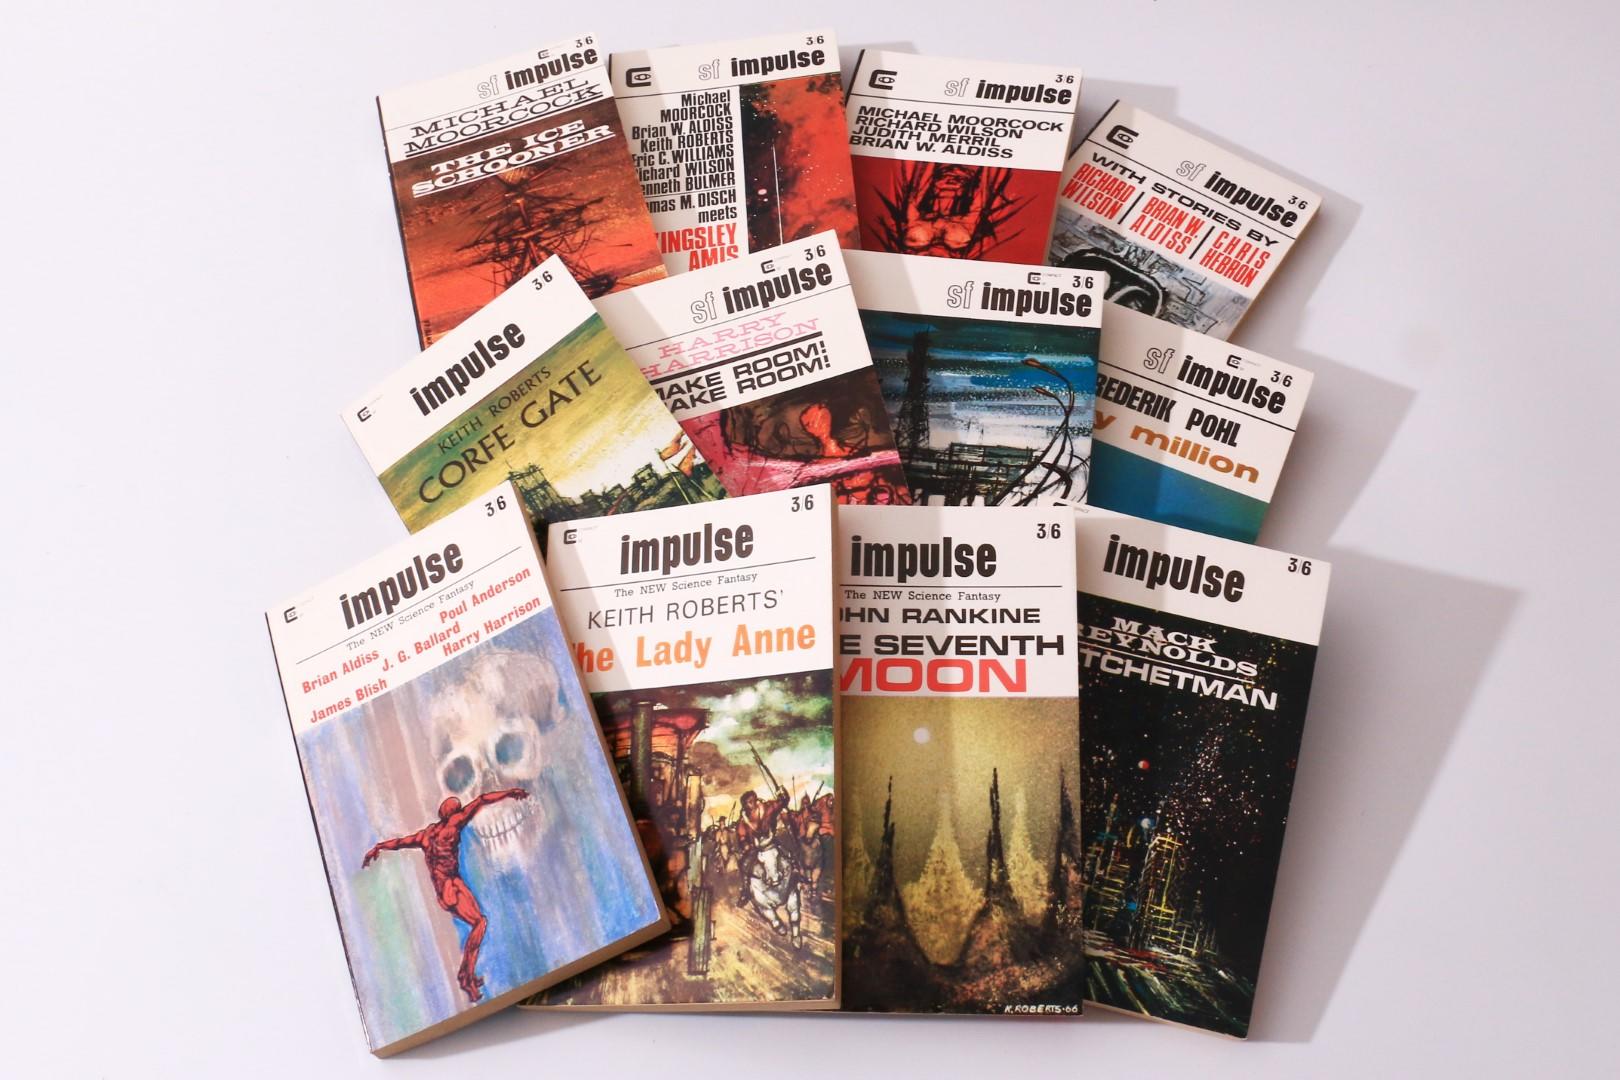 Various inc. Aldiss, Moorcock, Ballard, Roberts - A Complete Run of Impulse and SF Impulse [including the first publications of the Pavane stories] - Roberts & Vinter, 1966-1967, First Edition.